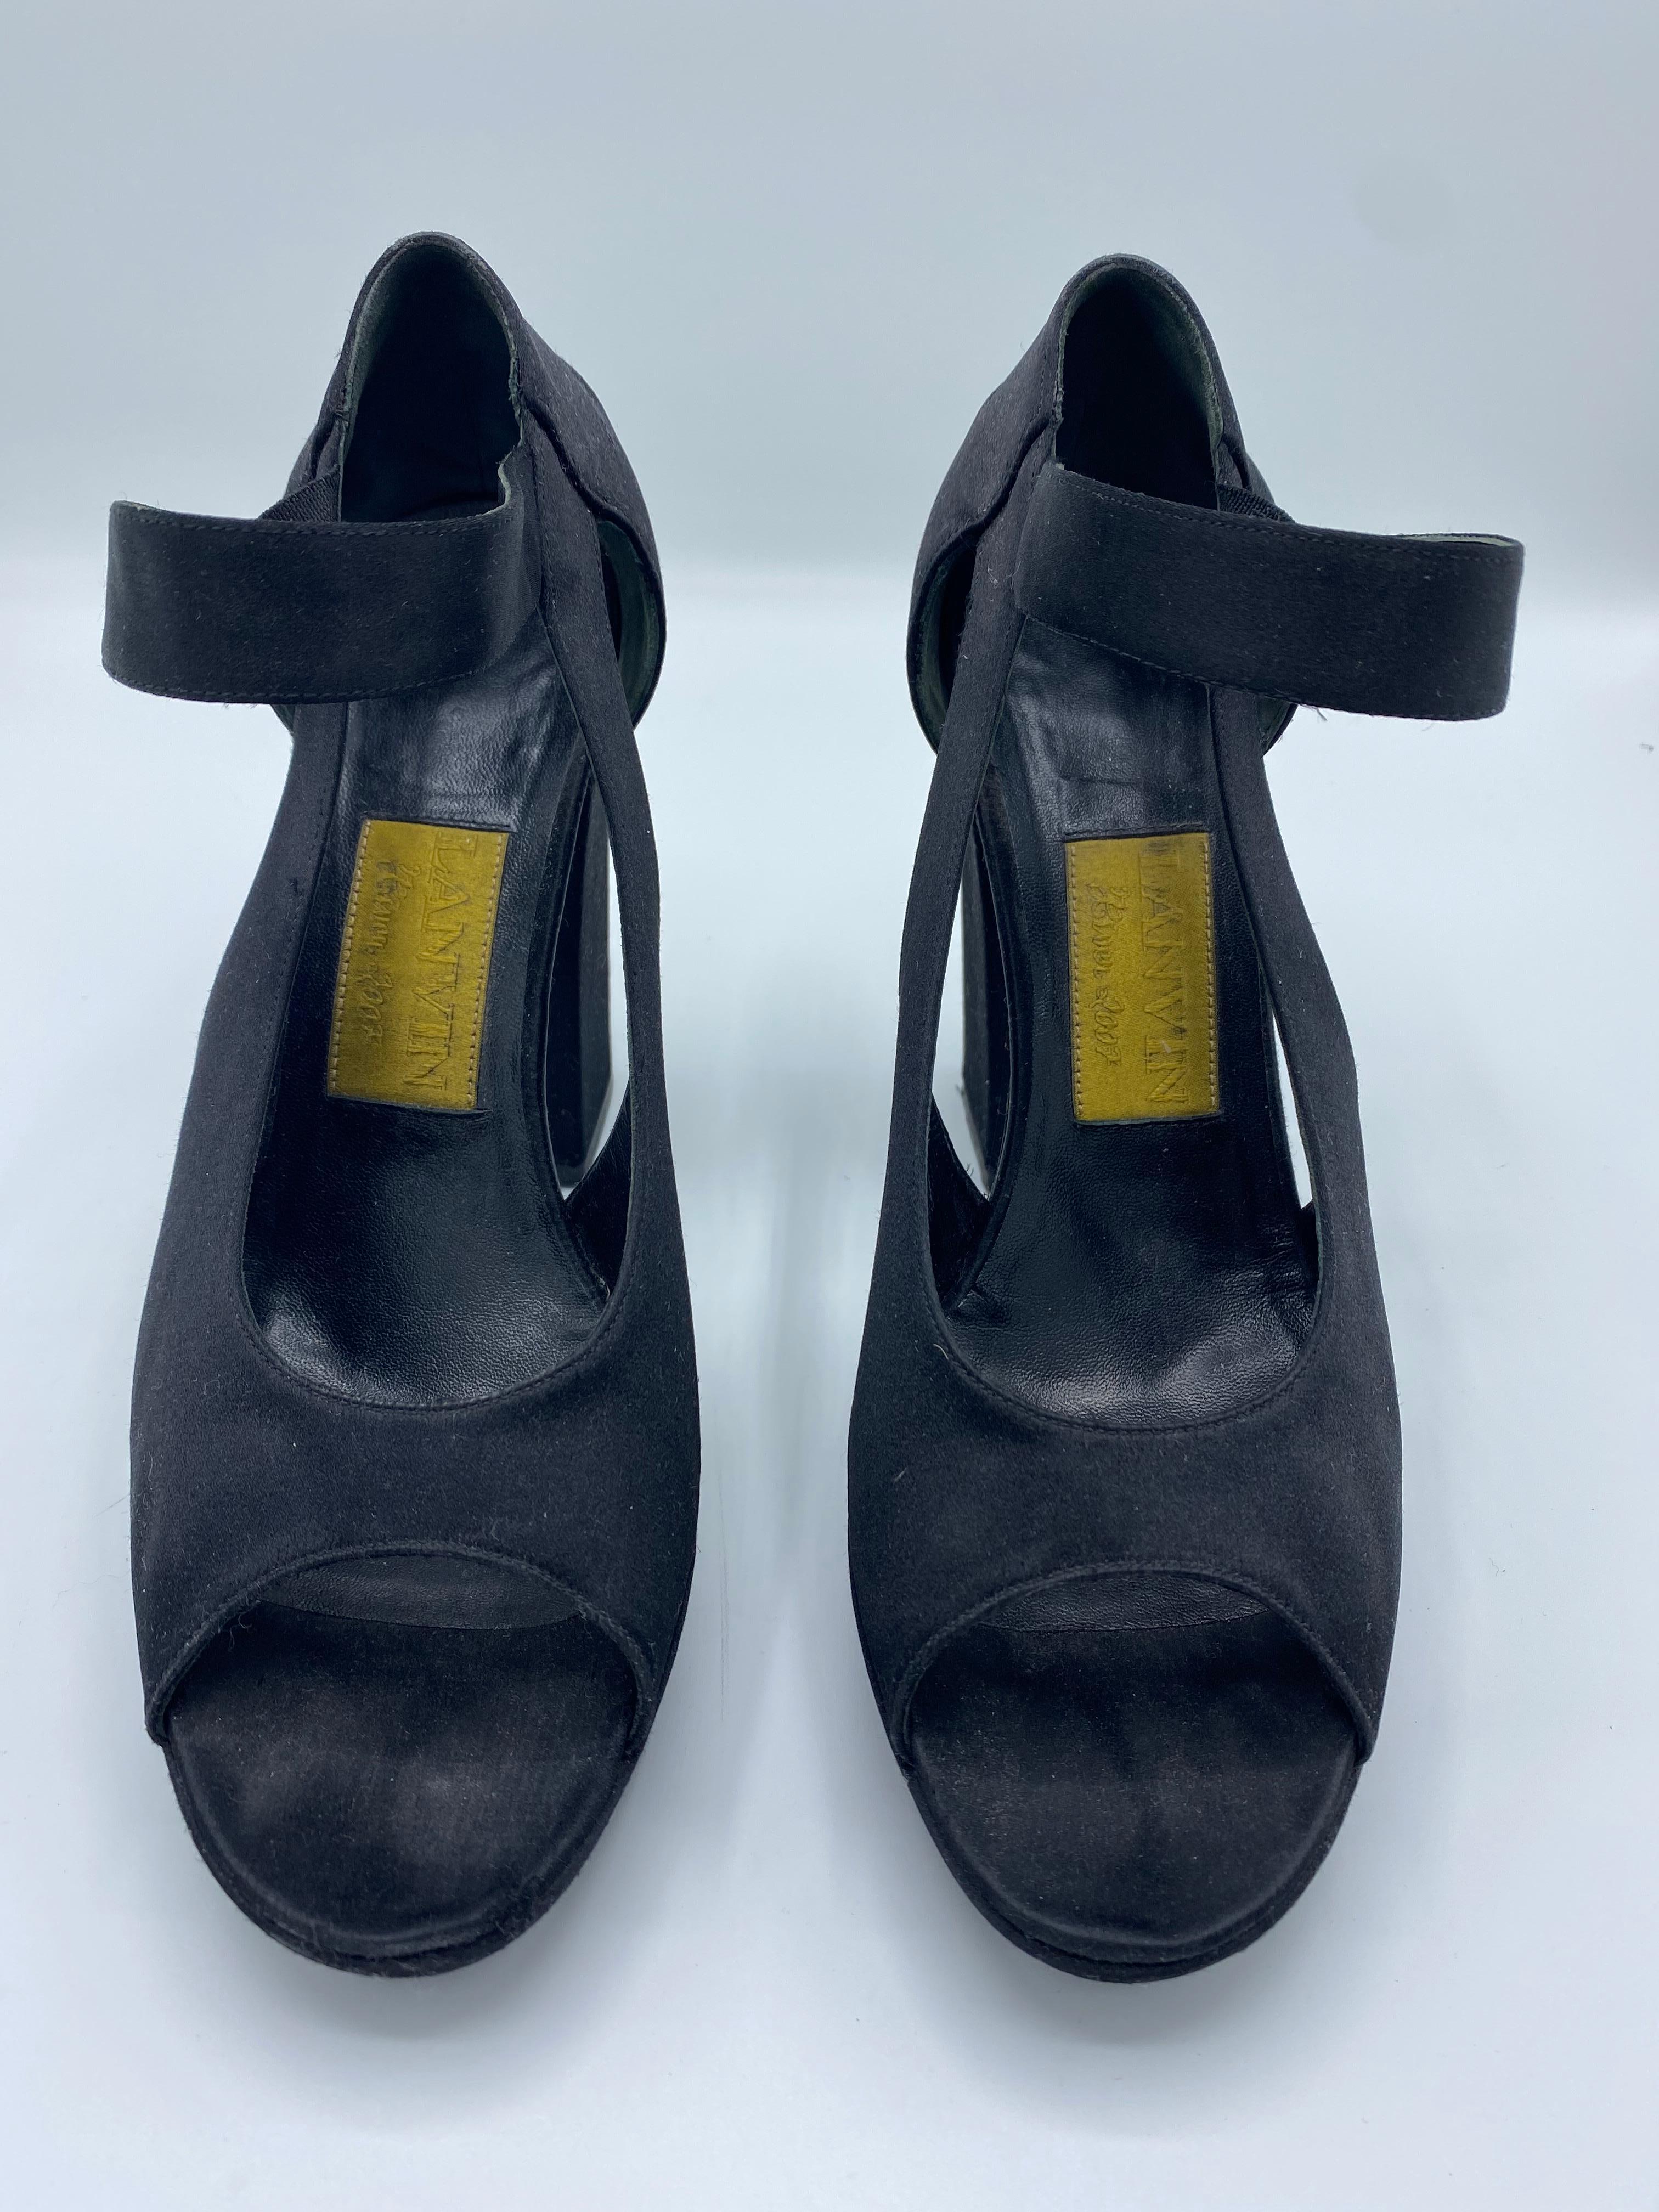 Product details:

The shoes are designed by Lanvin in France, it features open toe, strap with button closure and 4.5 inches heel high.